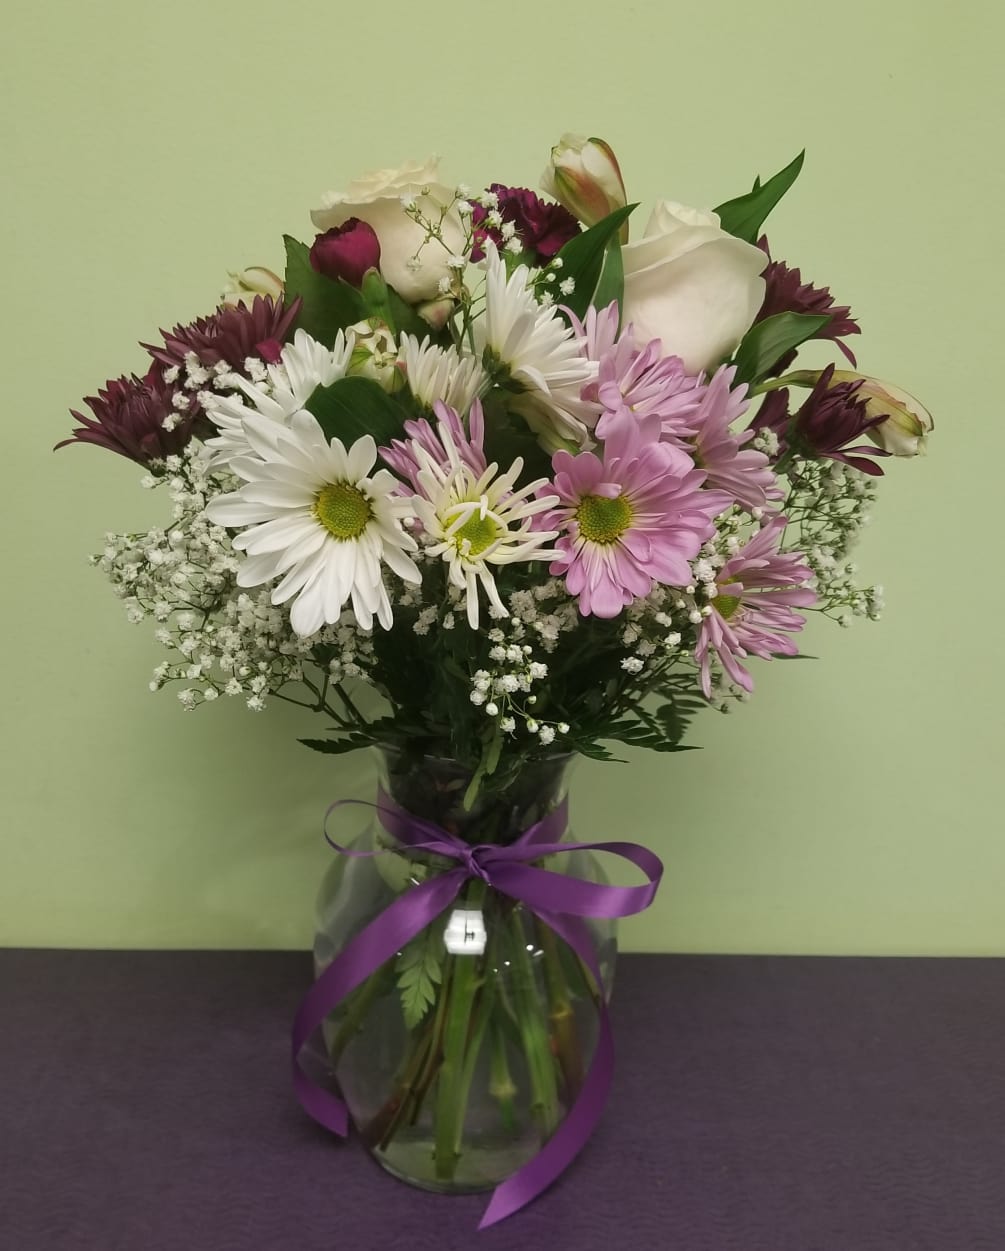 This is a special arrangement with hints of purple, lavender, and whites.